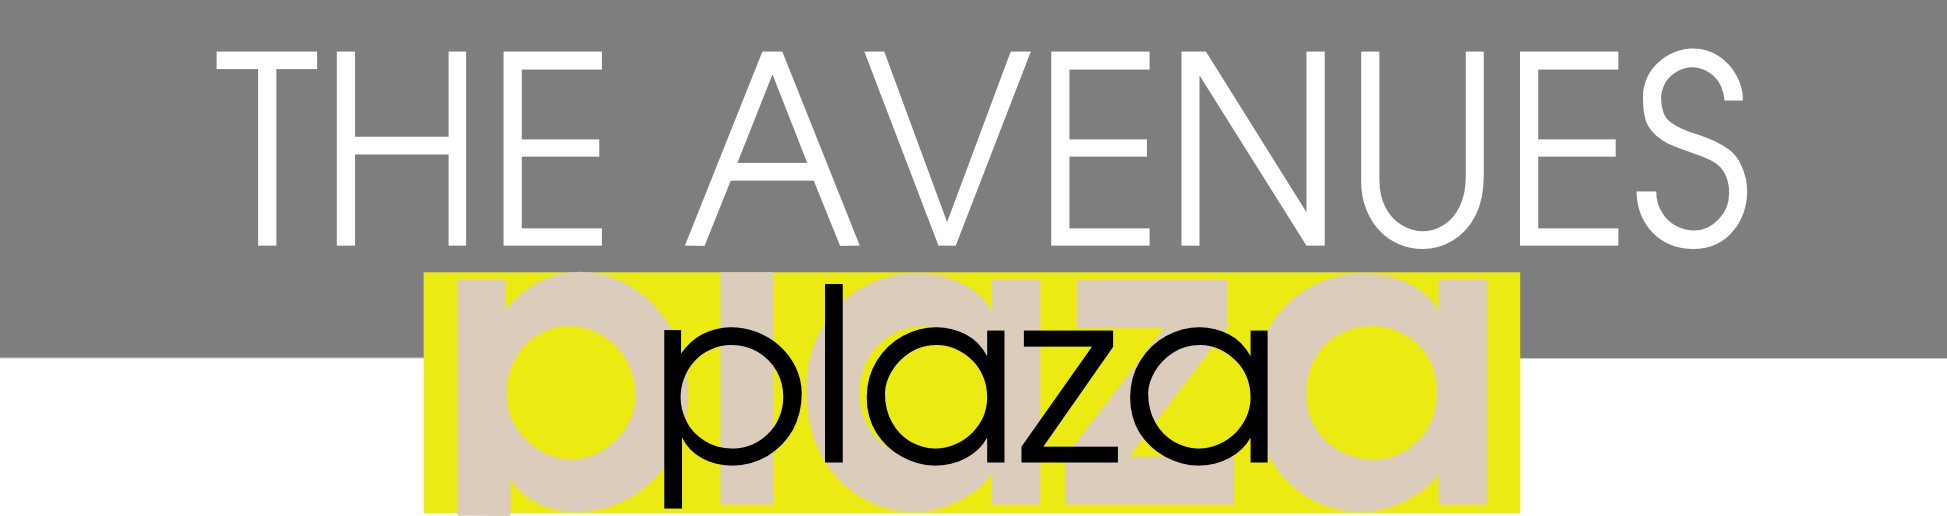 The Avenues Logo.png